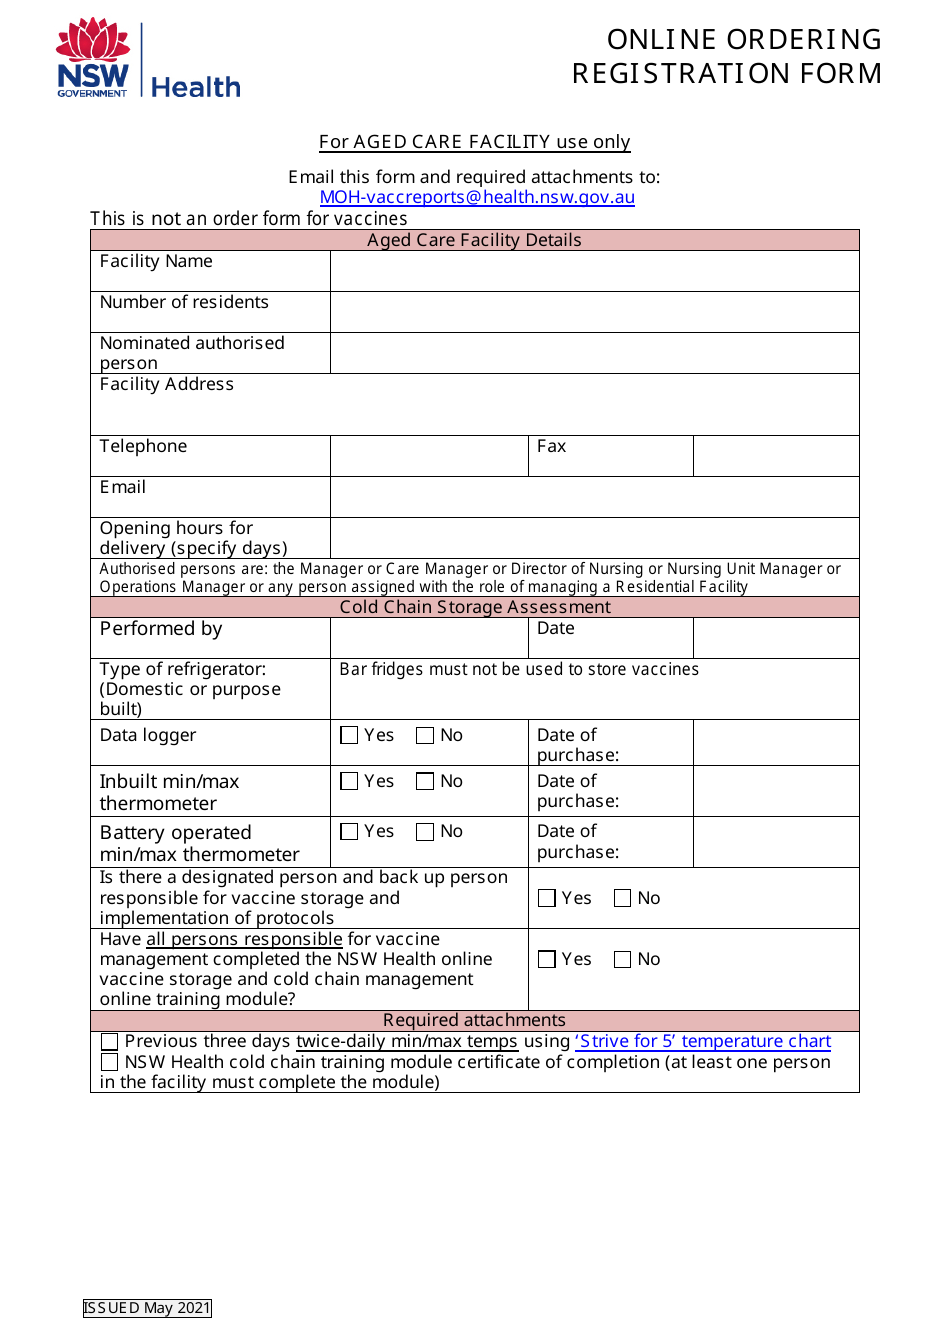 Aged Care Facility Online Ordering Registration Form - New South Wales, Australia, Page 1